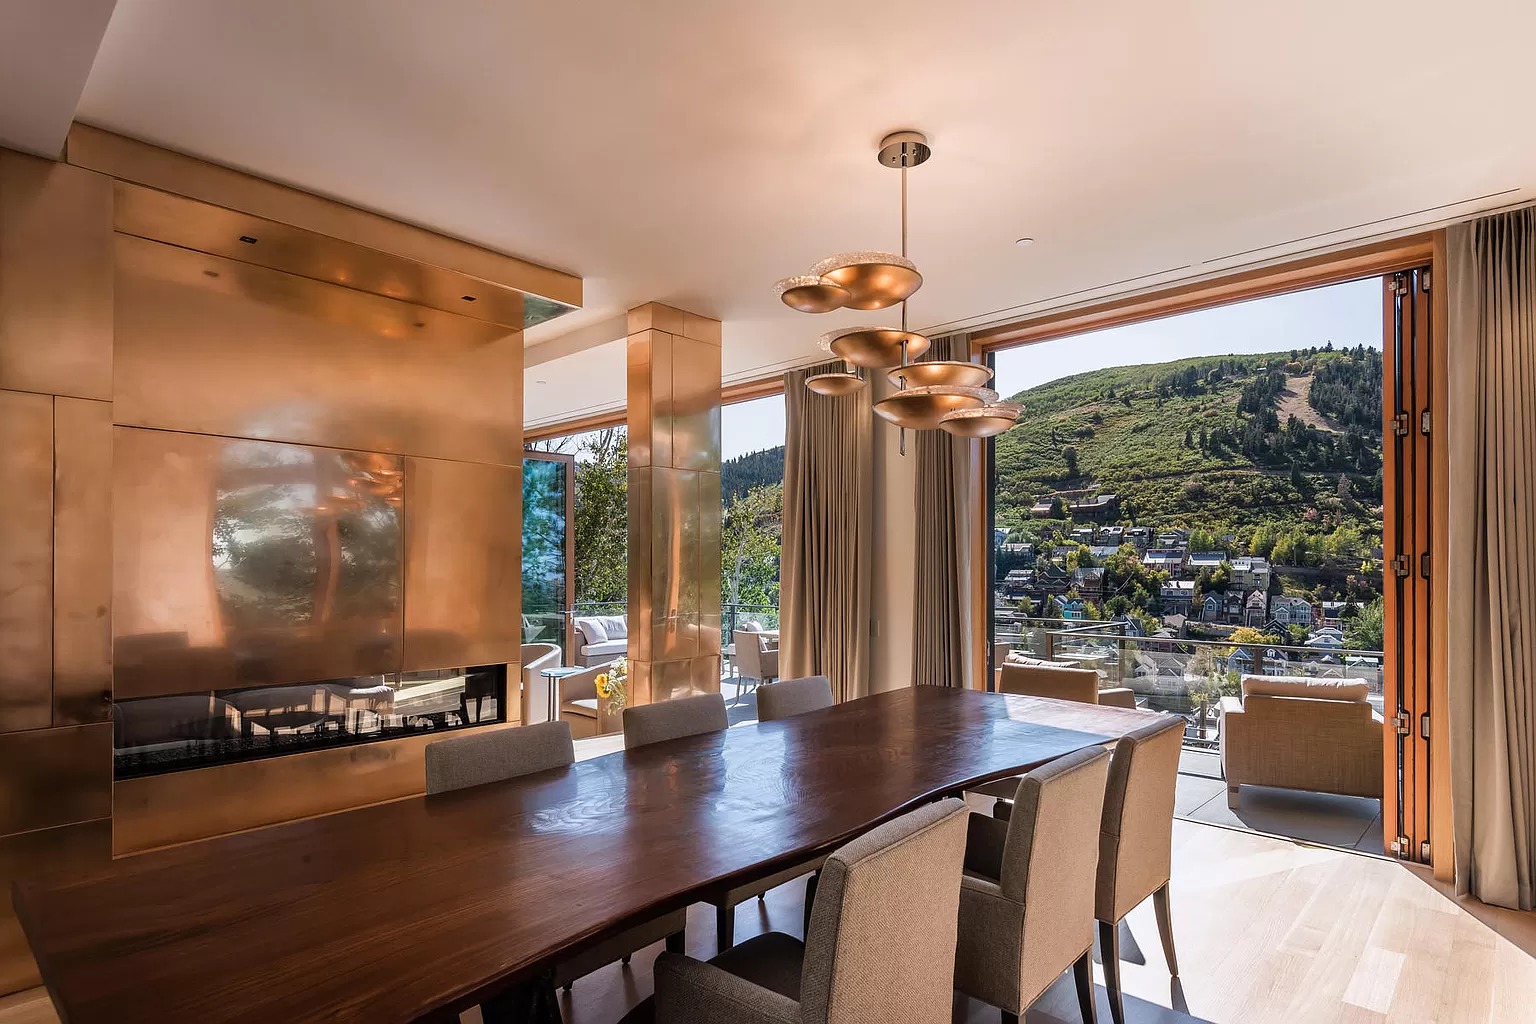 331 Mchenry Ave, Park City, UT 84060 - $7,850,000 home for sale, house images, photos and pics gallery